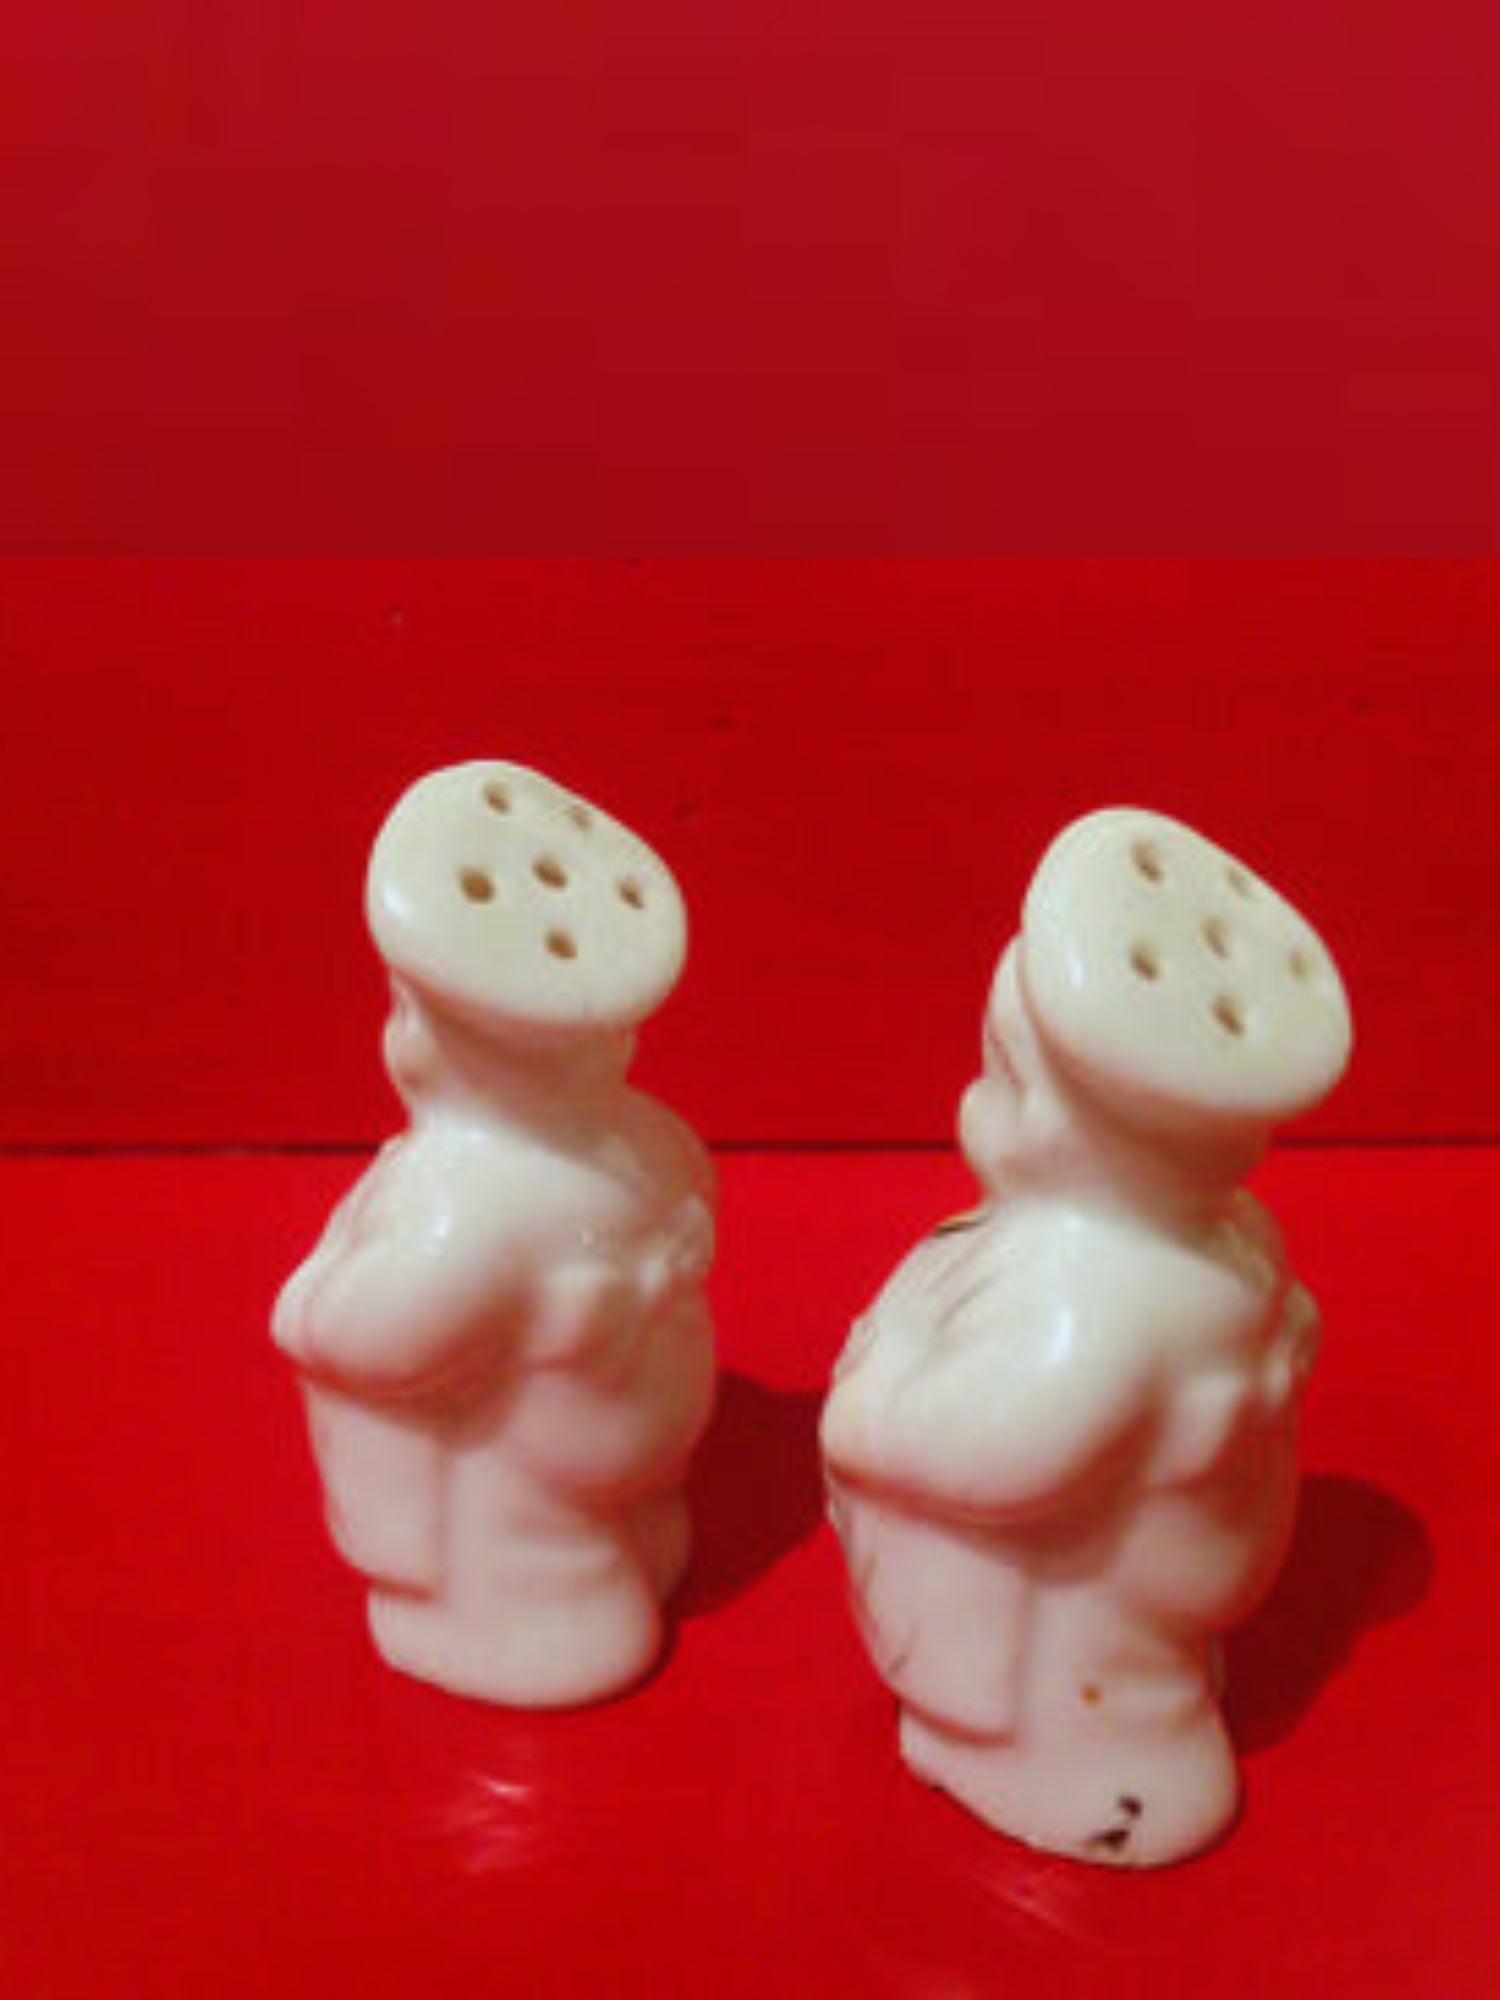 Art and Jesus' salt and pepper shakers